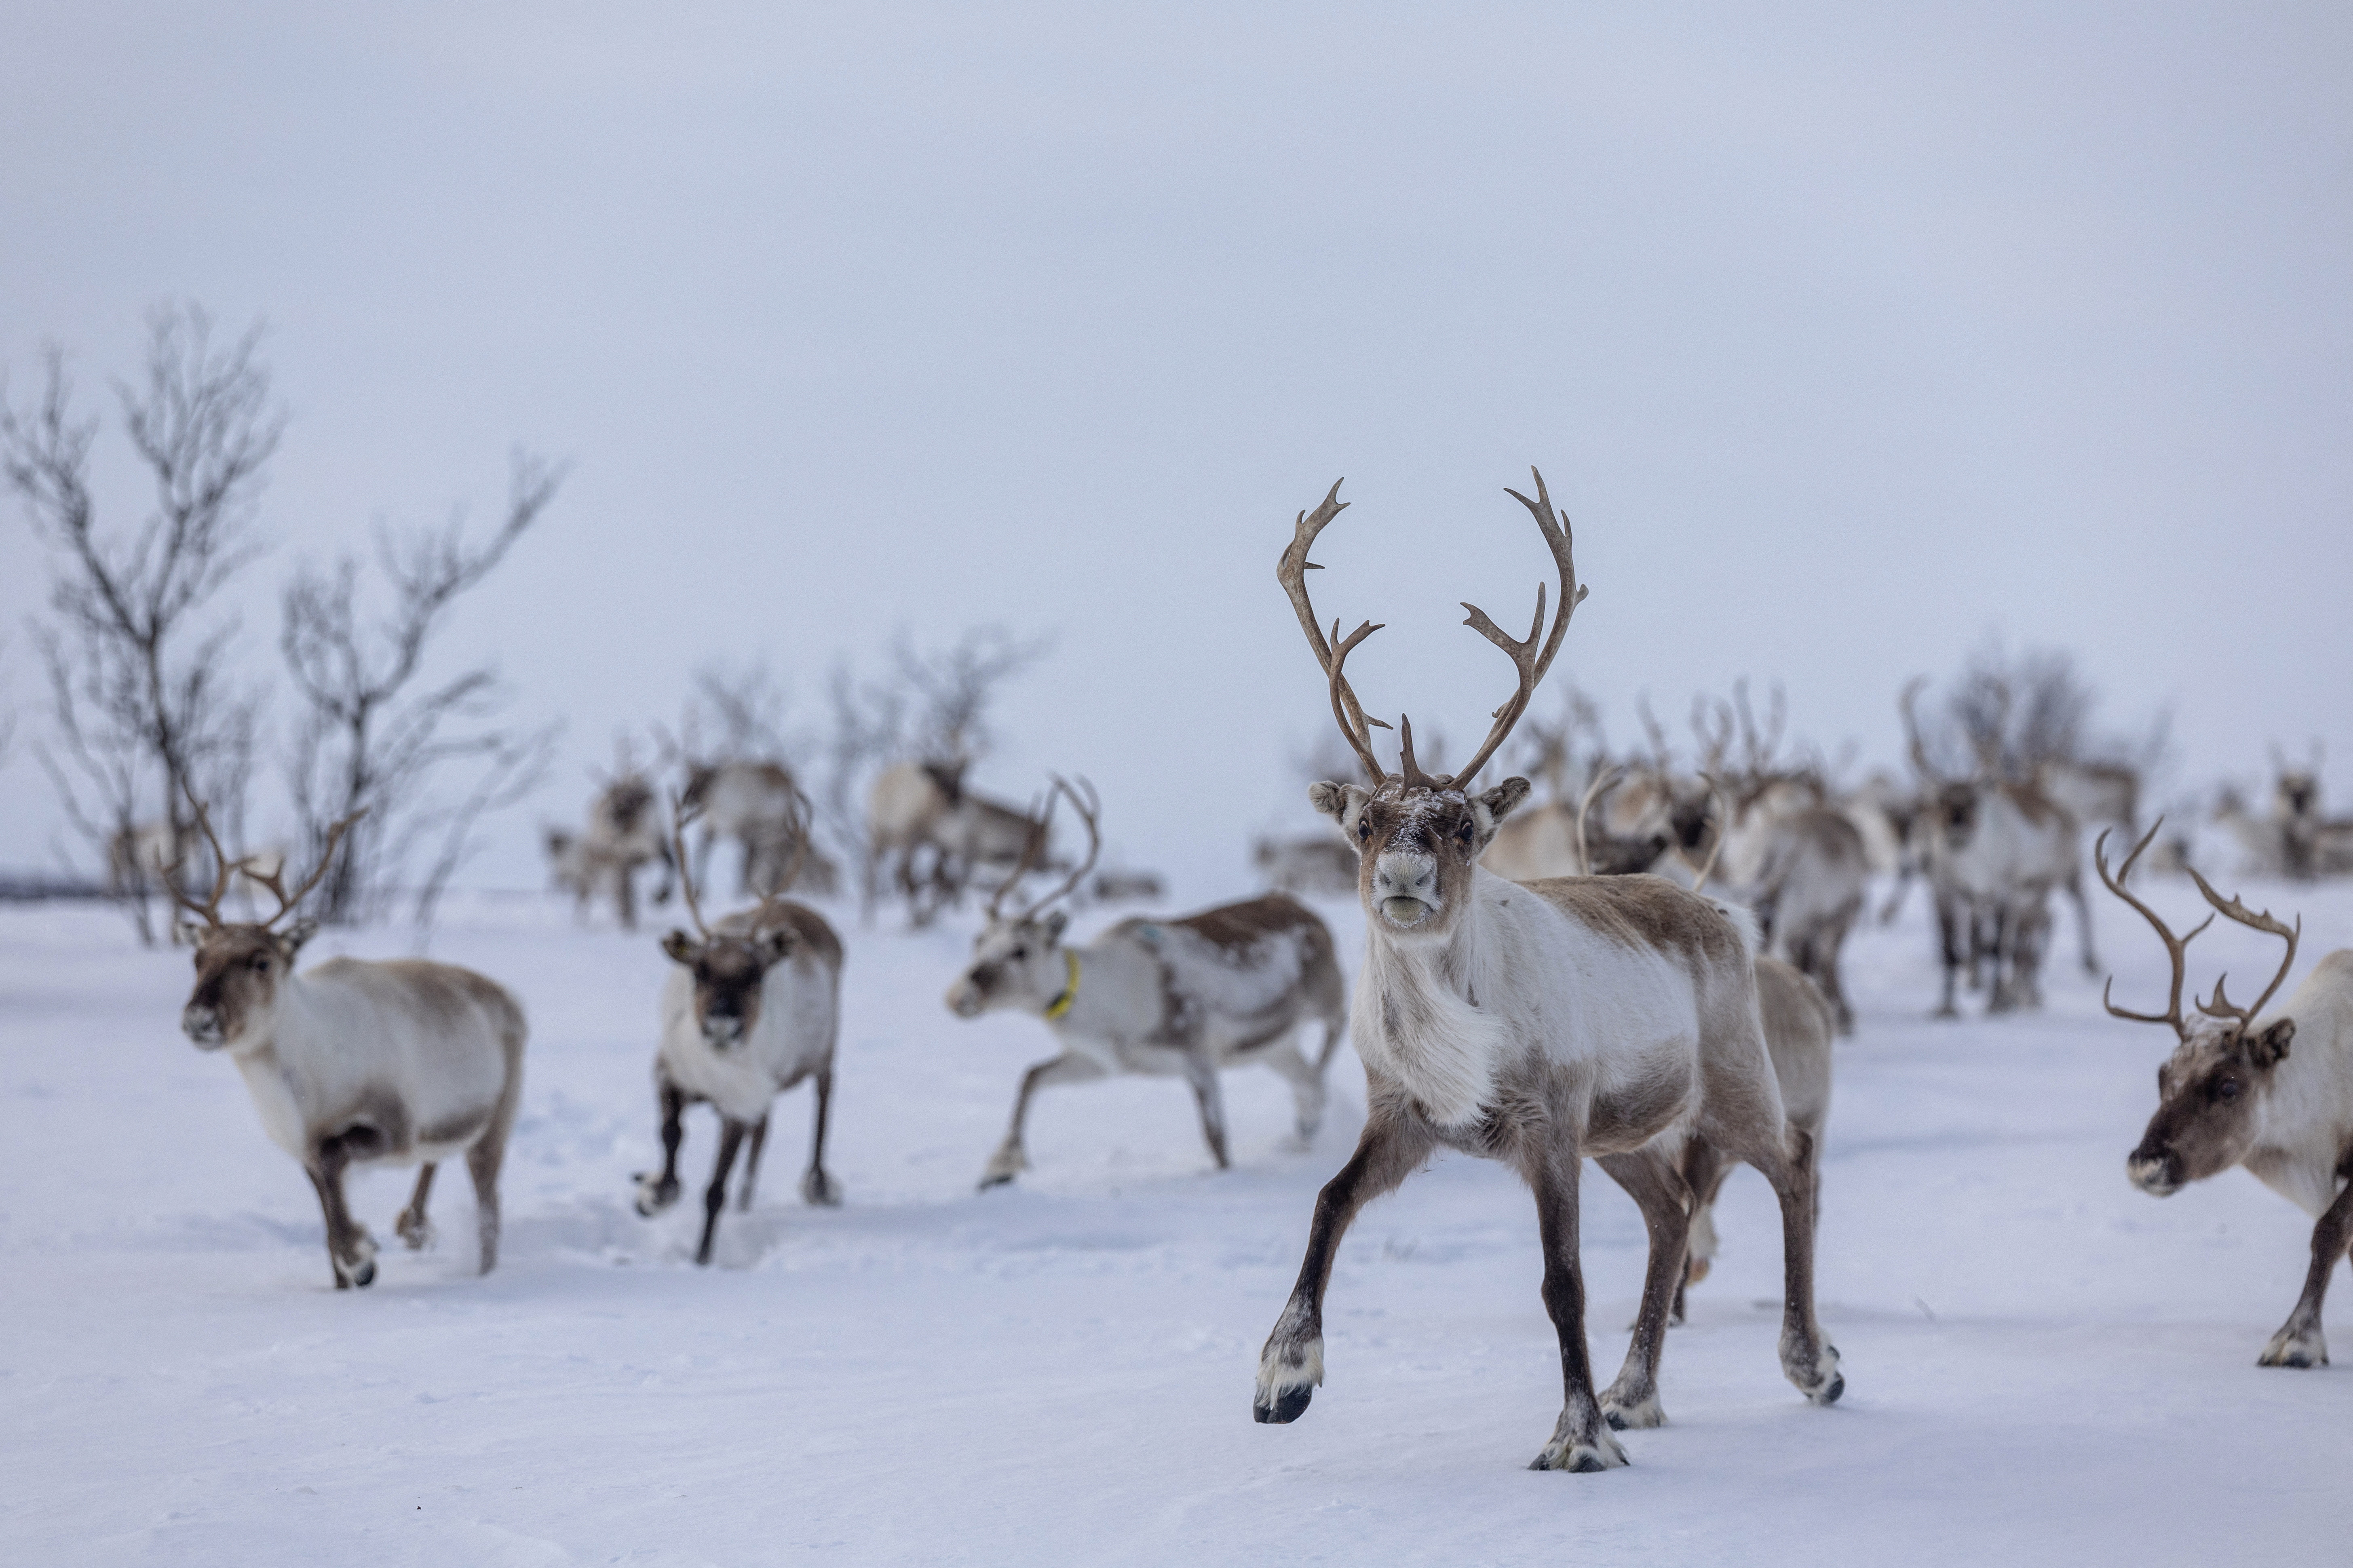 The Wider Image: Reindeer herders battle power line needed for Norway's climate goal